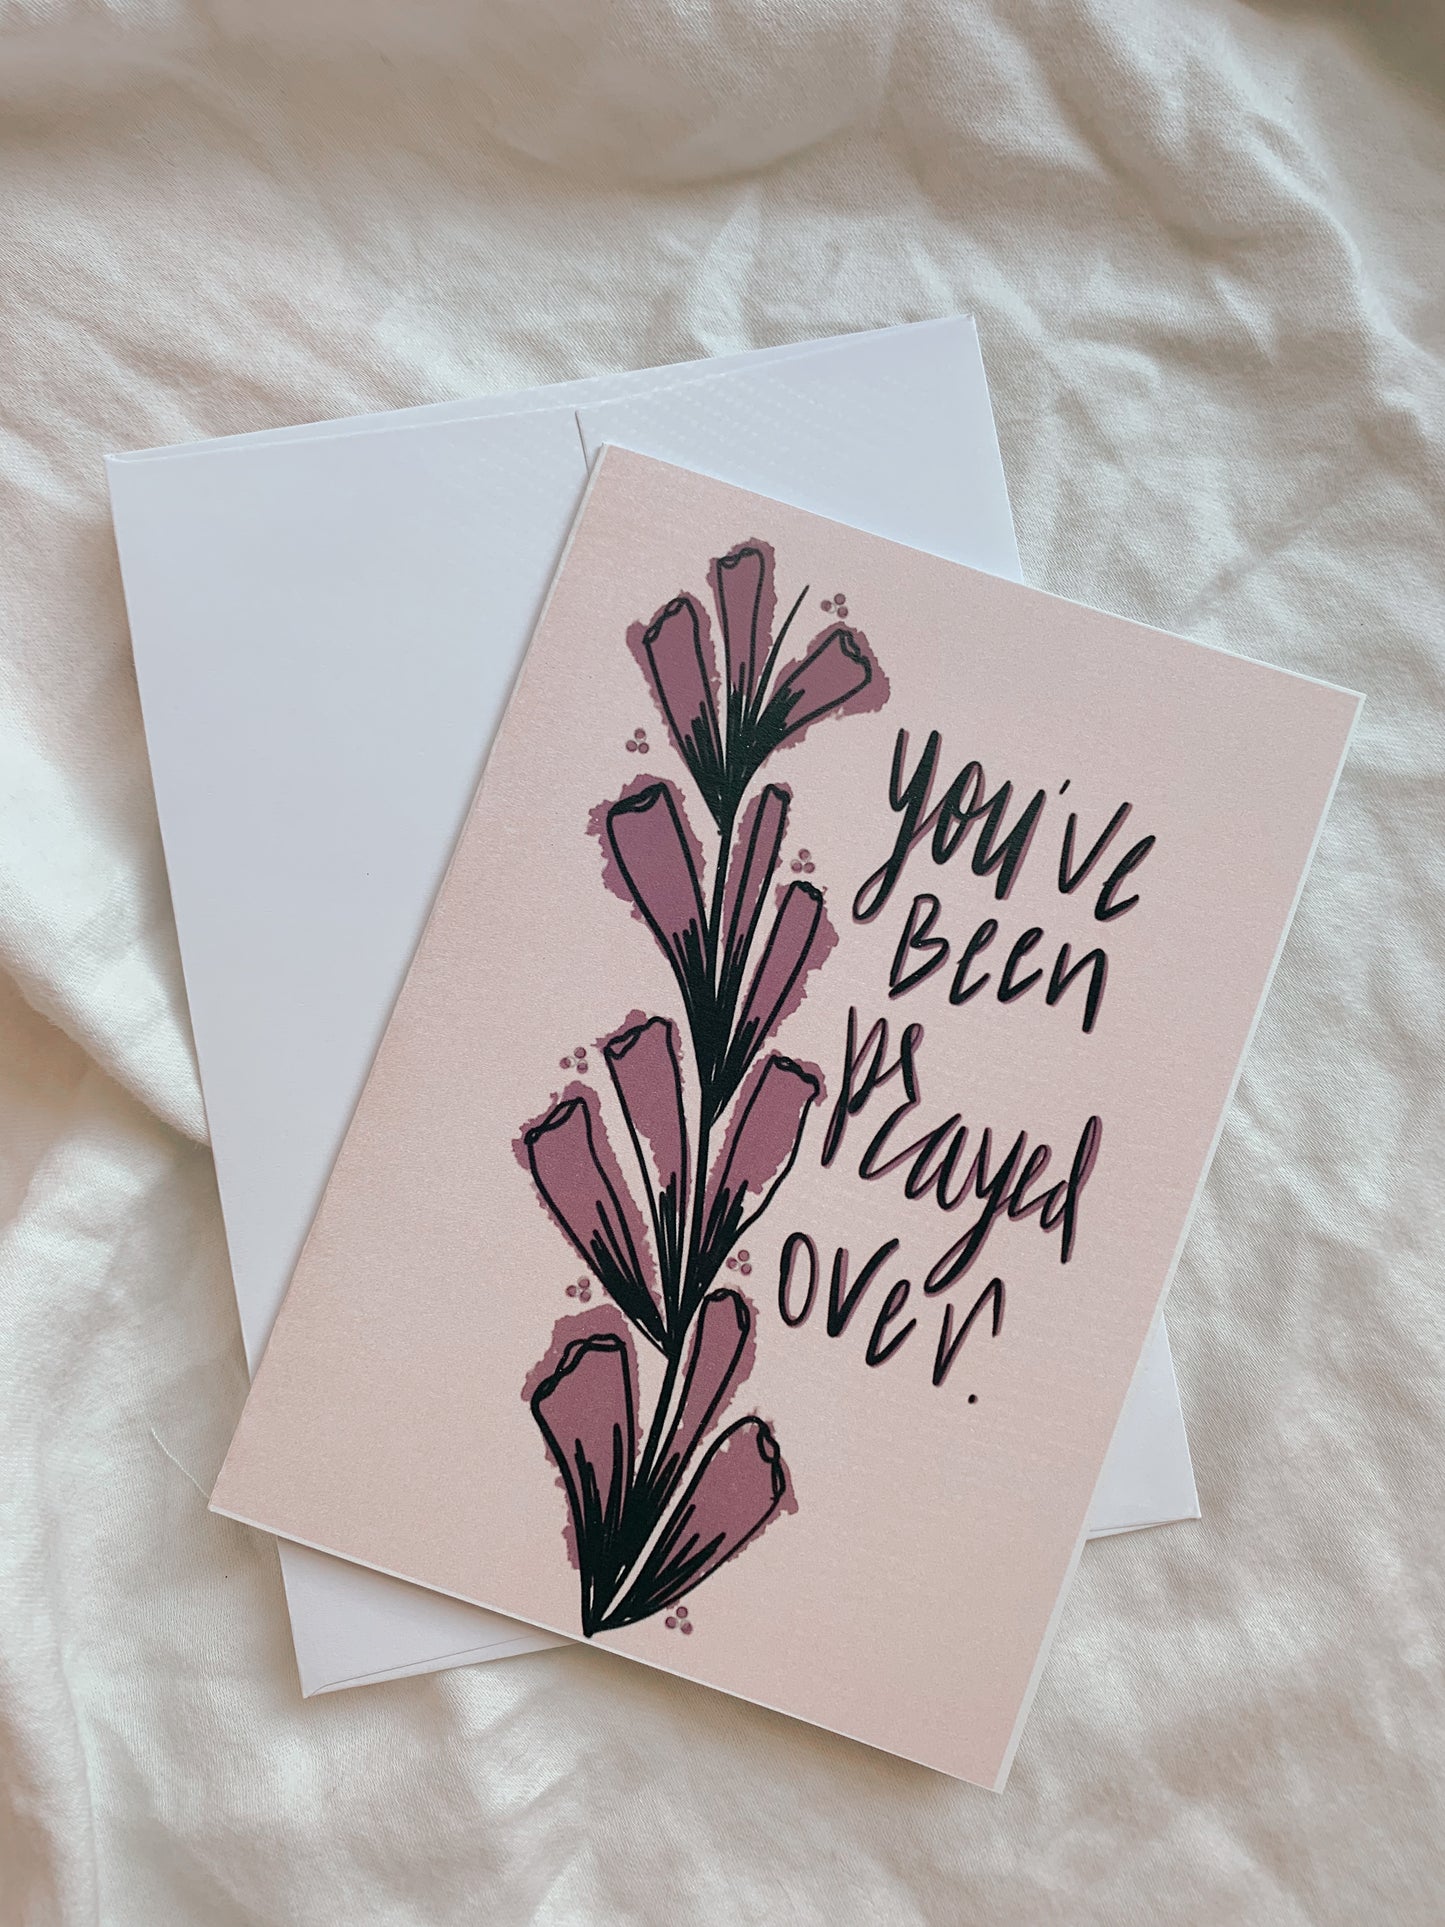 "You've been prayed over" greeting card - Abby’s Threads